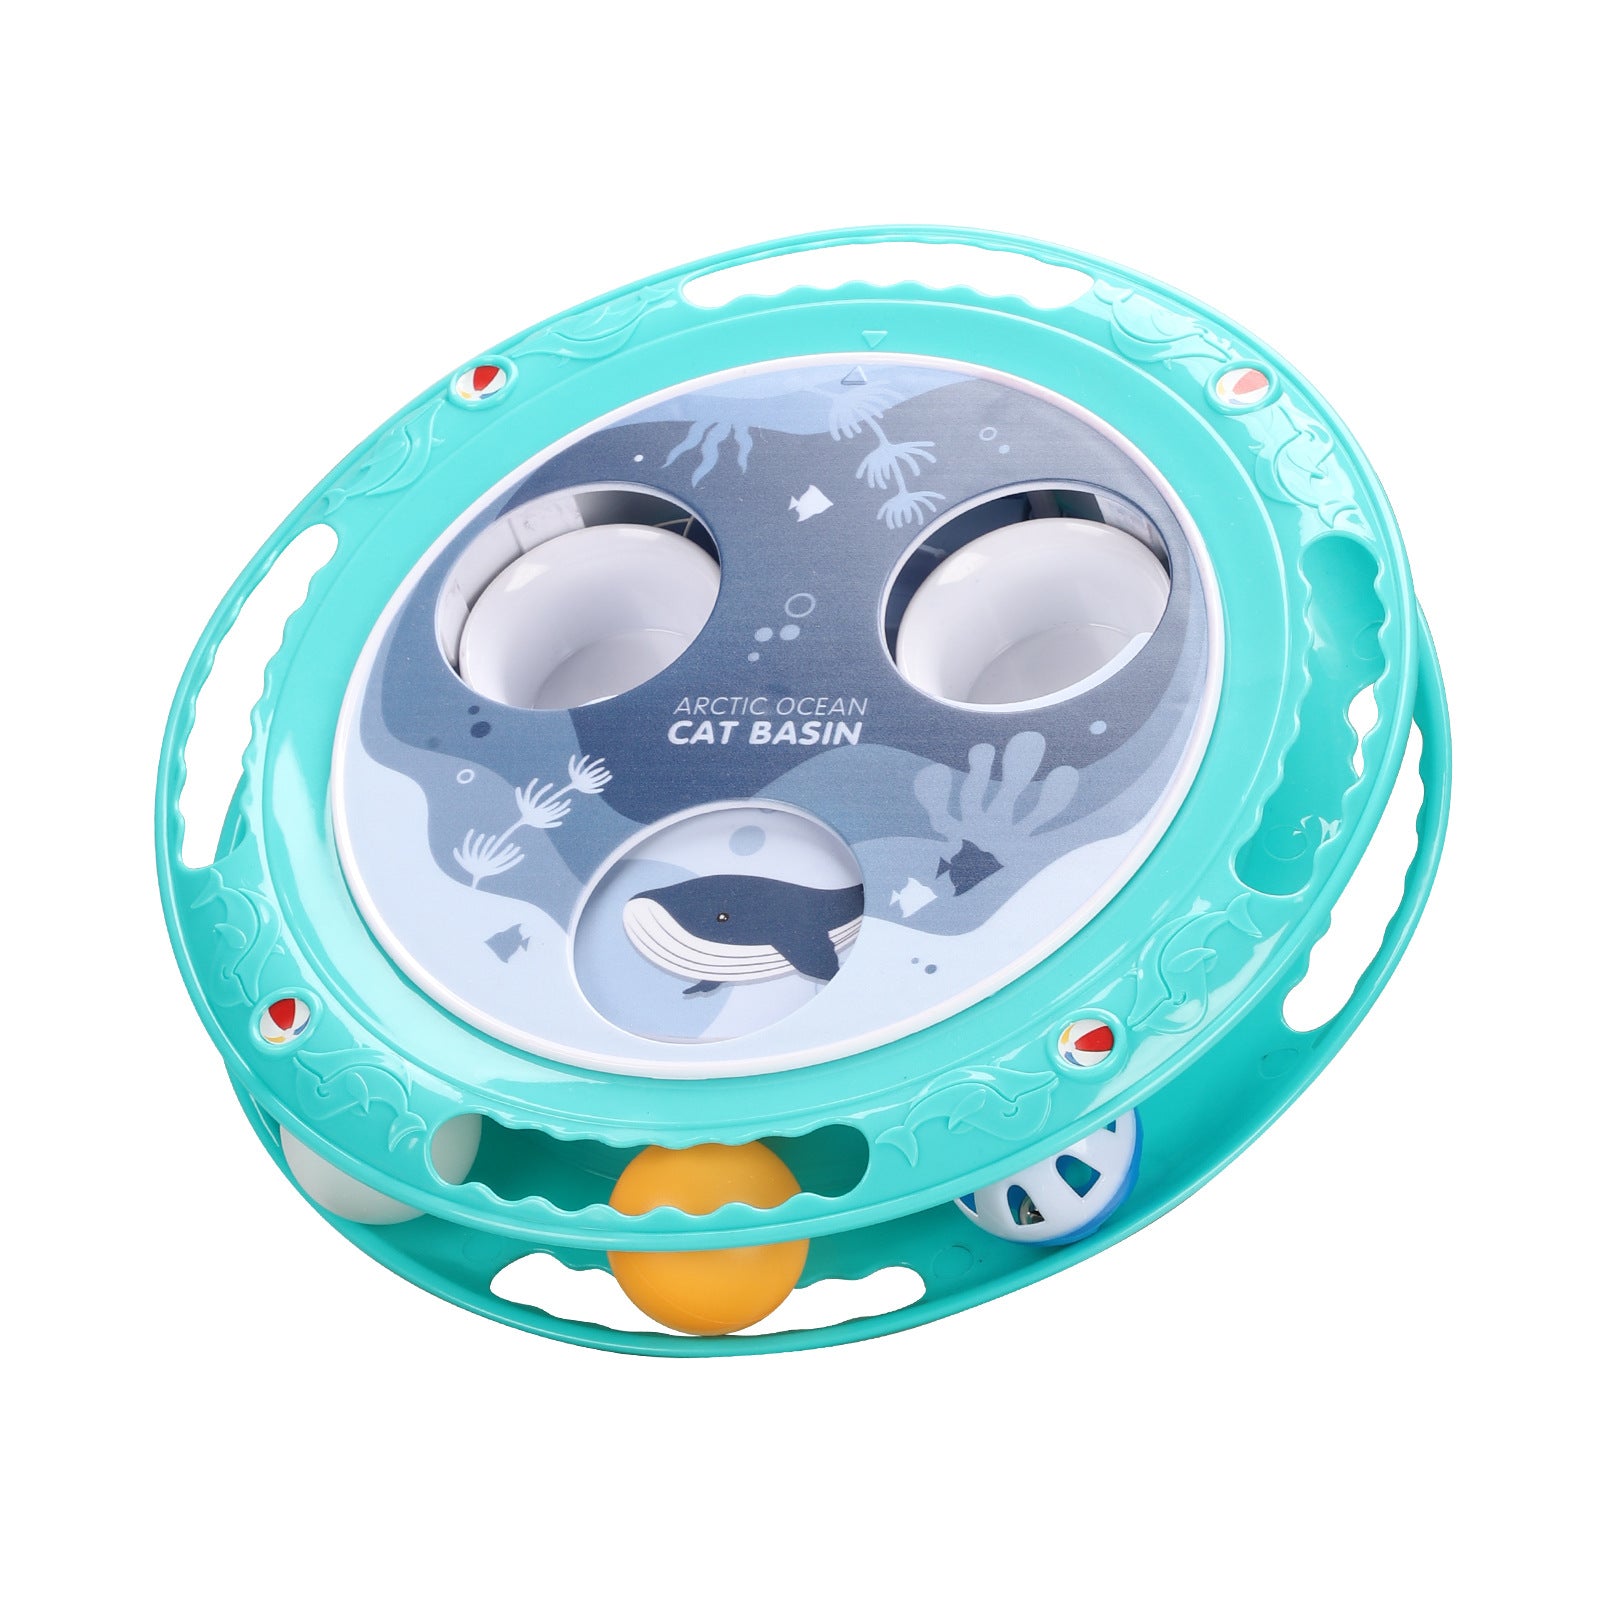 New Interactive Cat-Dog Ball Electric Toy 360 Degree Rotation Non-Slip Turntable Toy DromedarShop.com Online Boutique